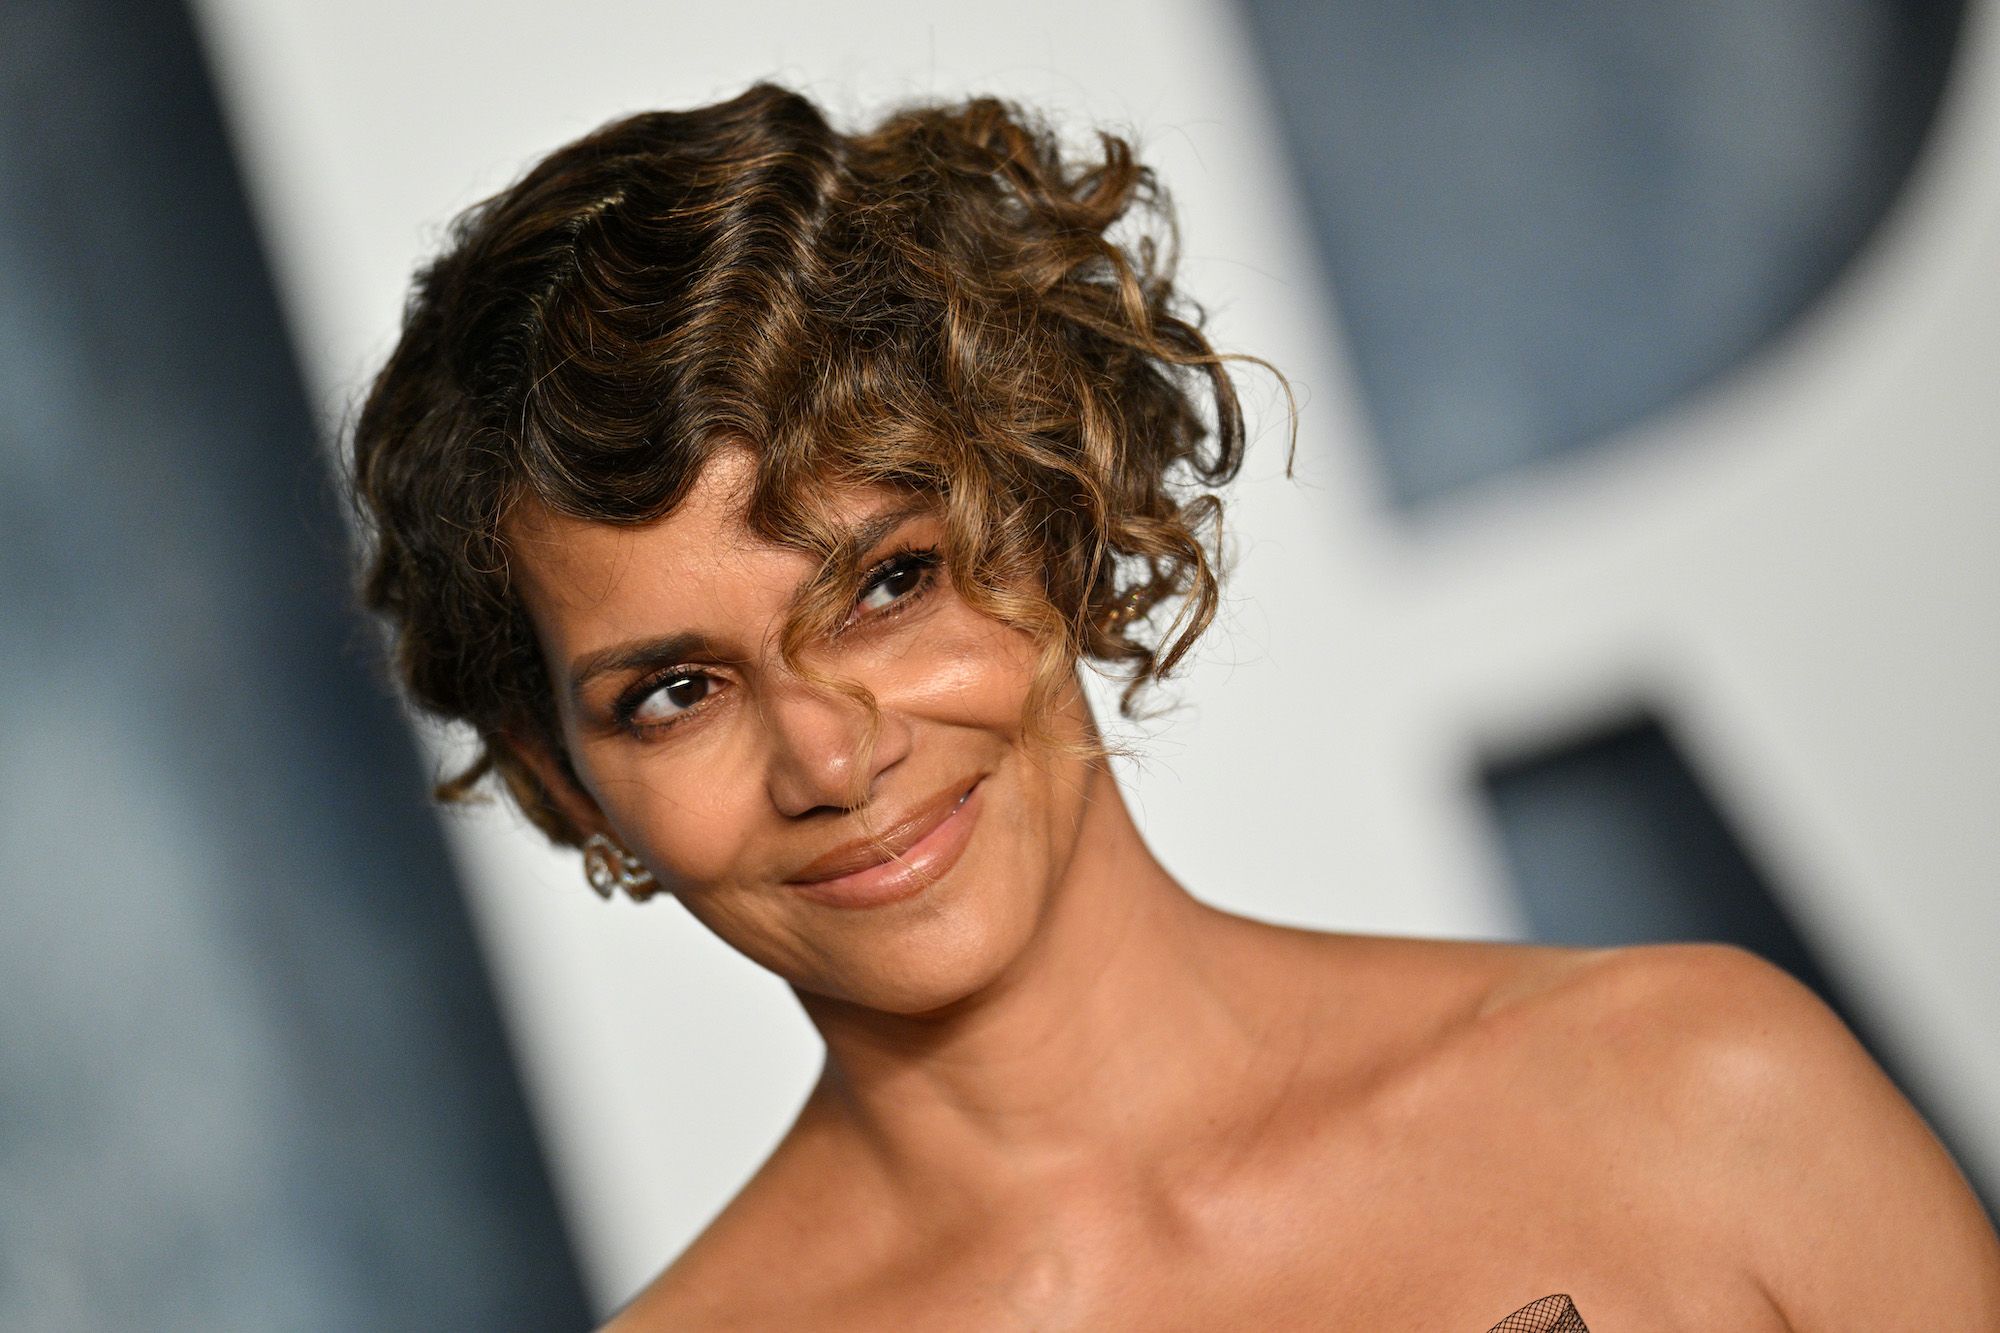 Fkk Nudist Galleries - Halle Berry Poses Nude While Drinking Wine on Her Balcony In New Pic